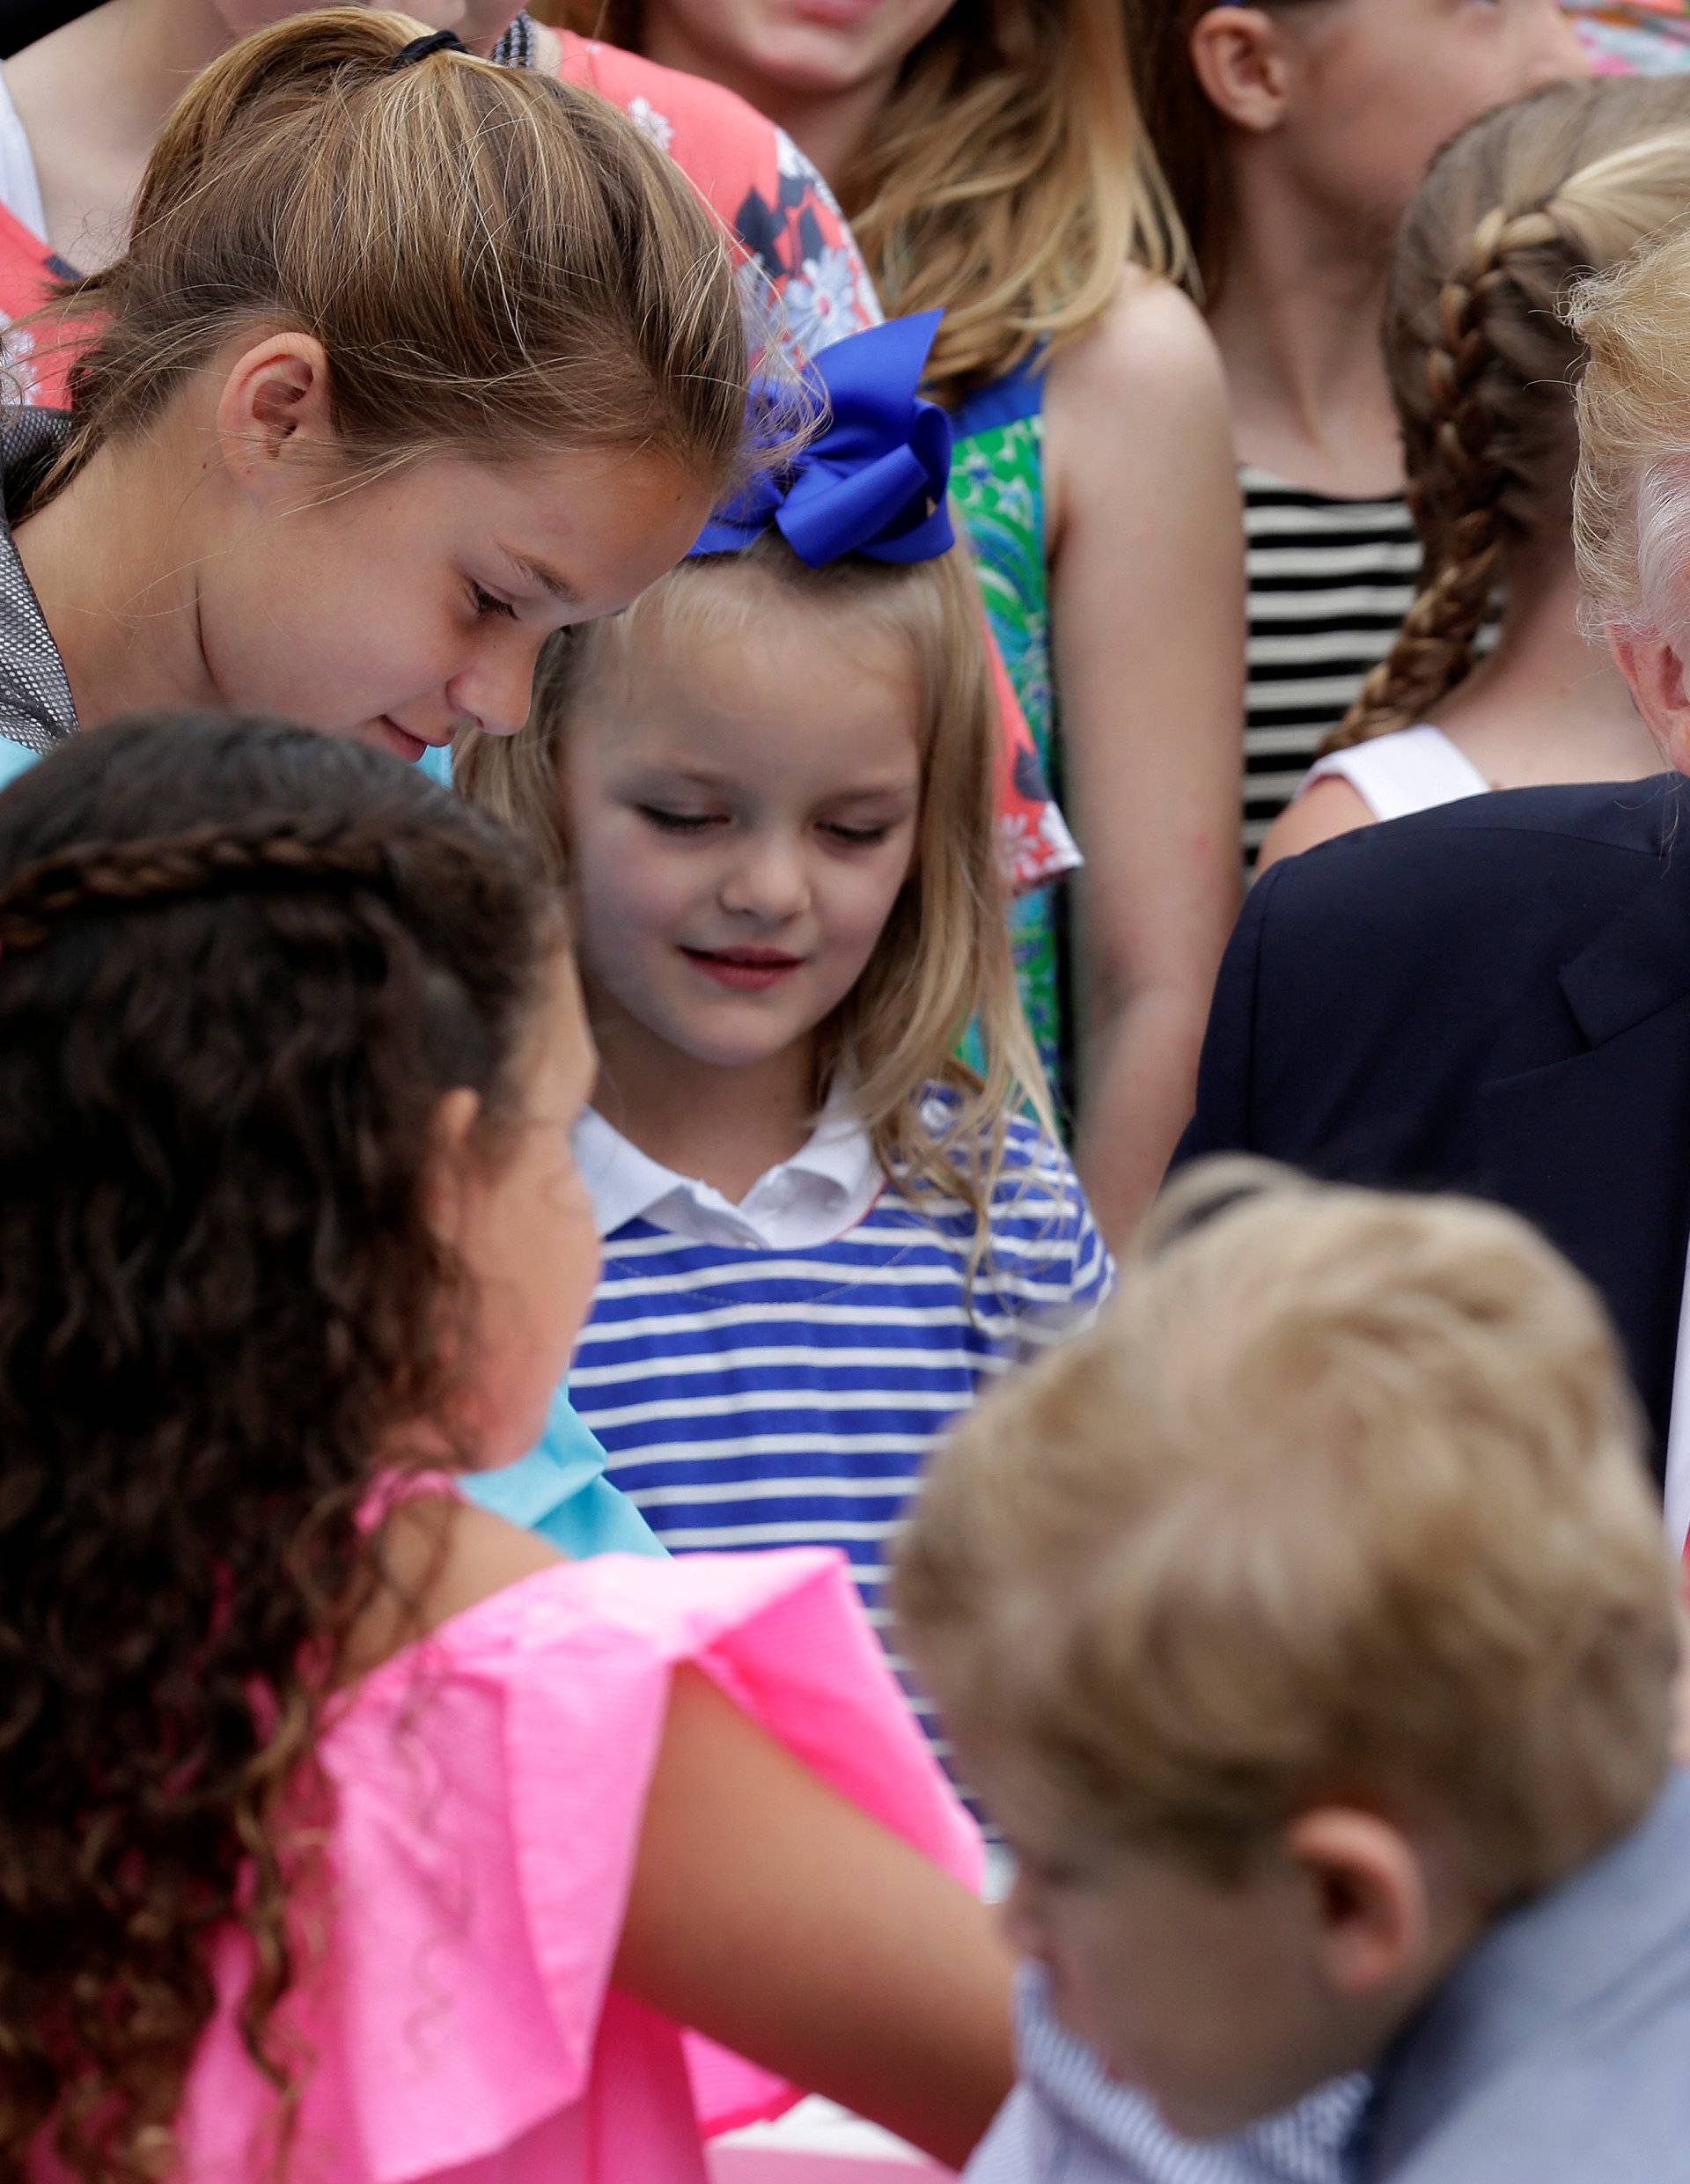 U.S. President Donald Trump speaks with children as they make Easter greeting cards for members of the military at the 139th annual White House Easter Egg Roll on the South Lawn of the White House in Washington